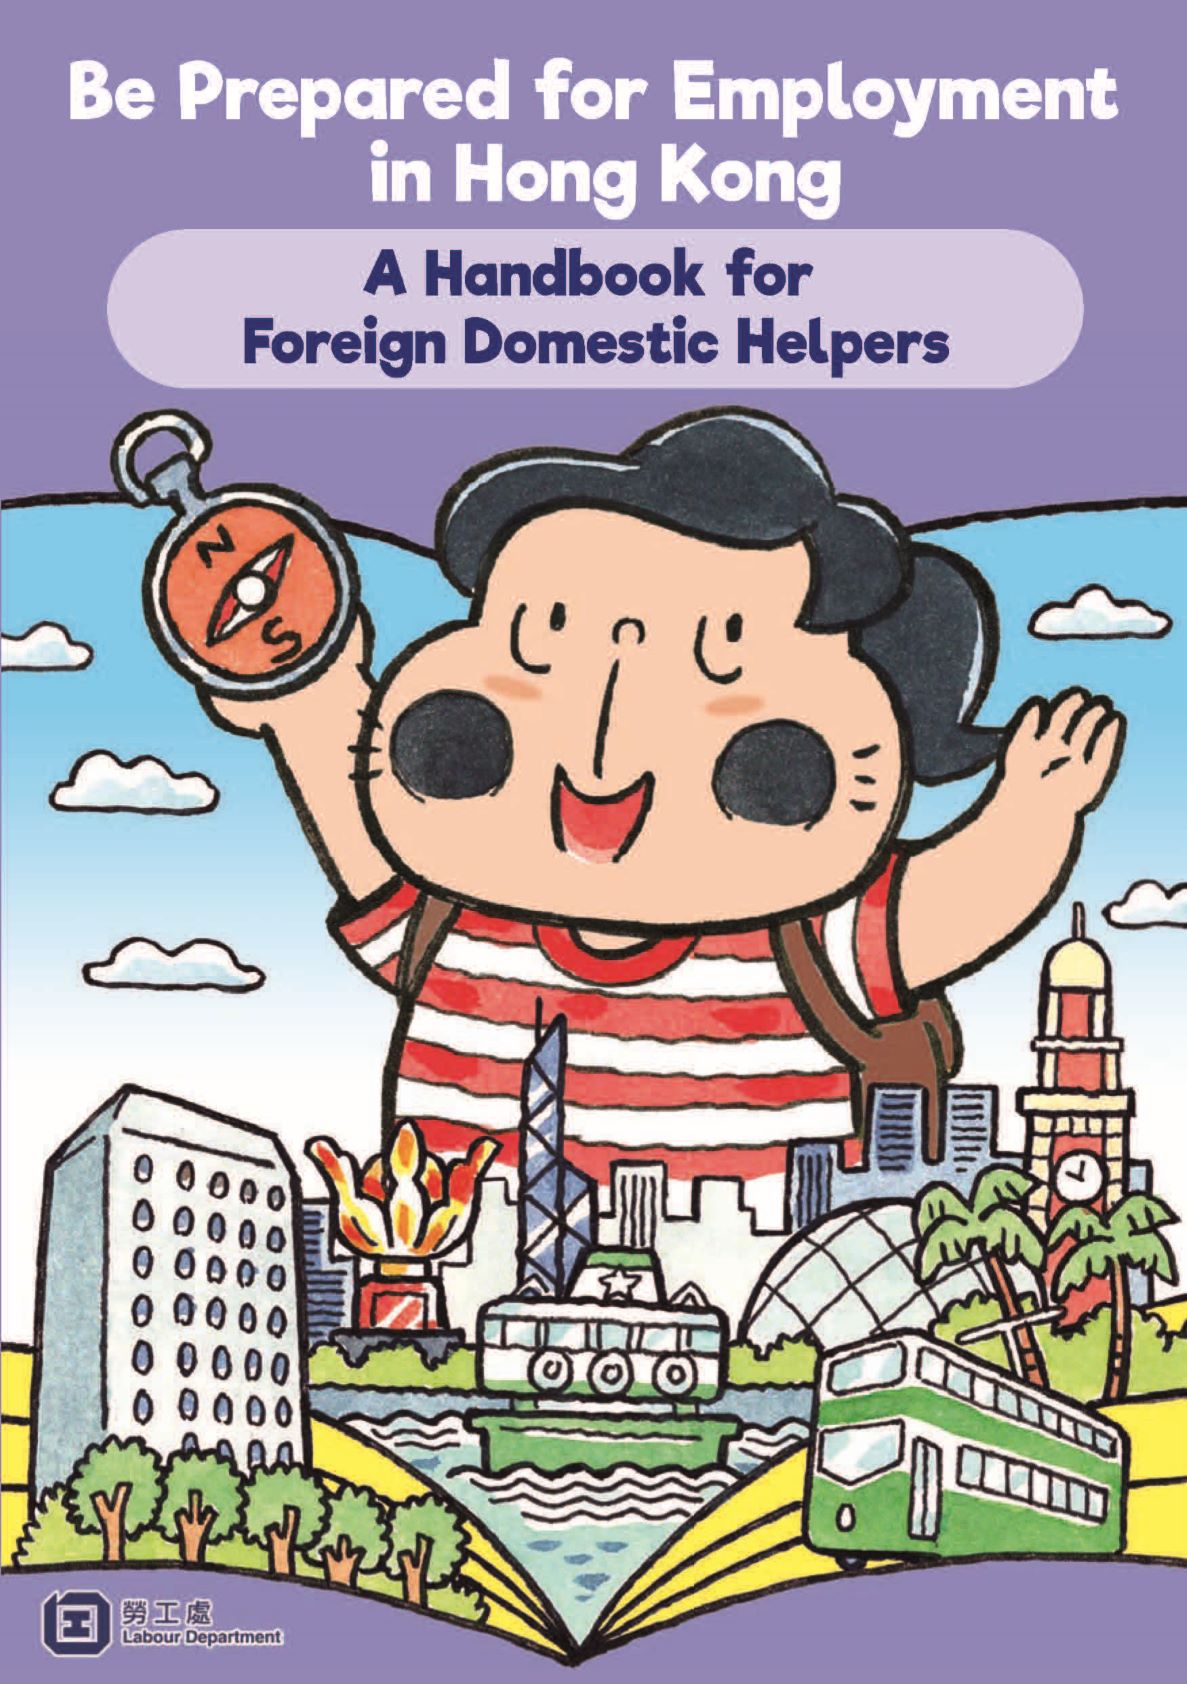 Be Prepared for Employment in Hong Kong - A Handbook for Foreign Domestic Helpers